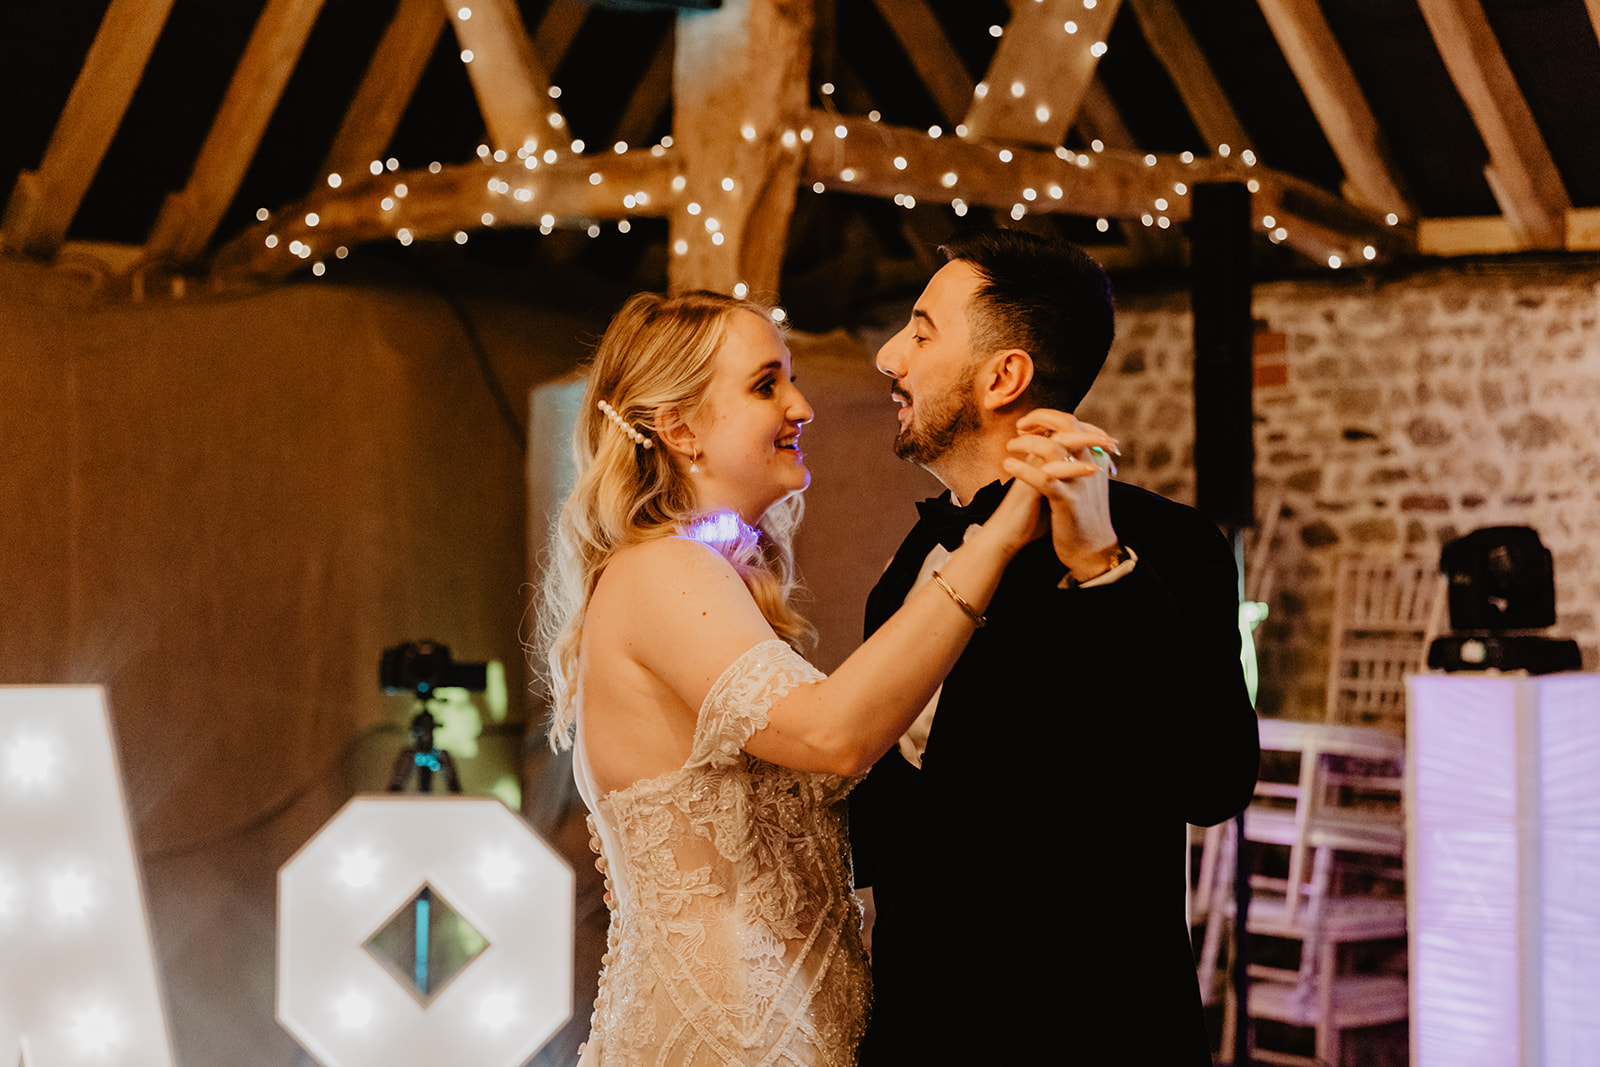 Bride and groom first dance at a Southlands barn wedding, Sussex. Photo by OliveJoy Photography.